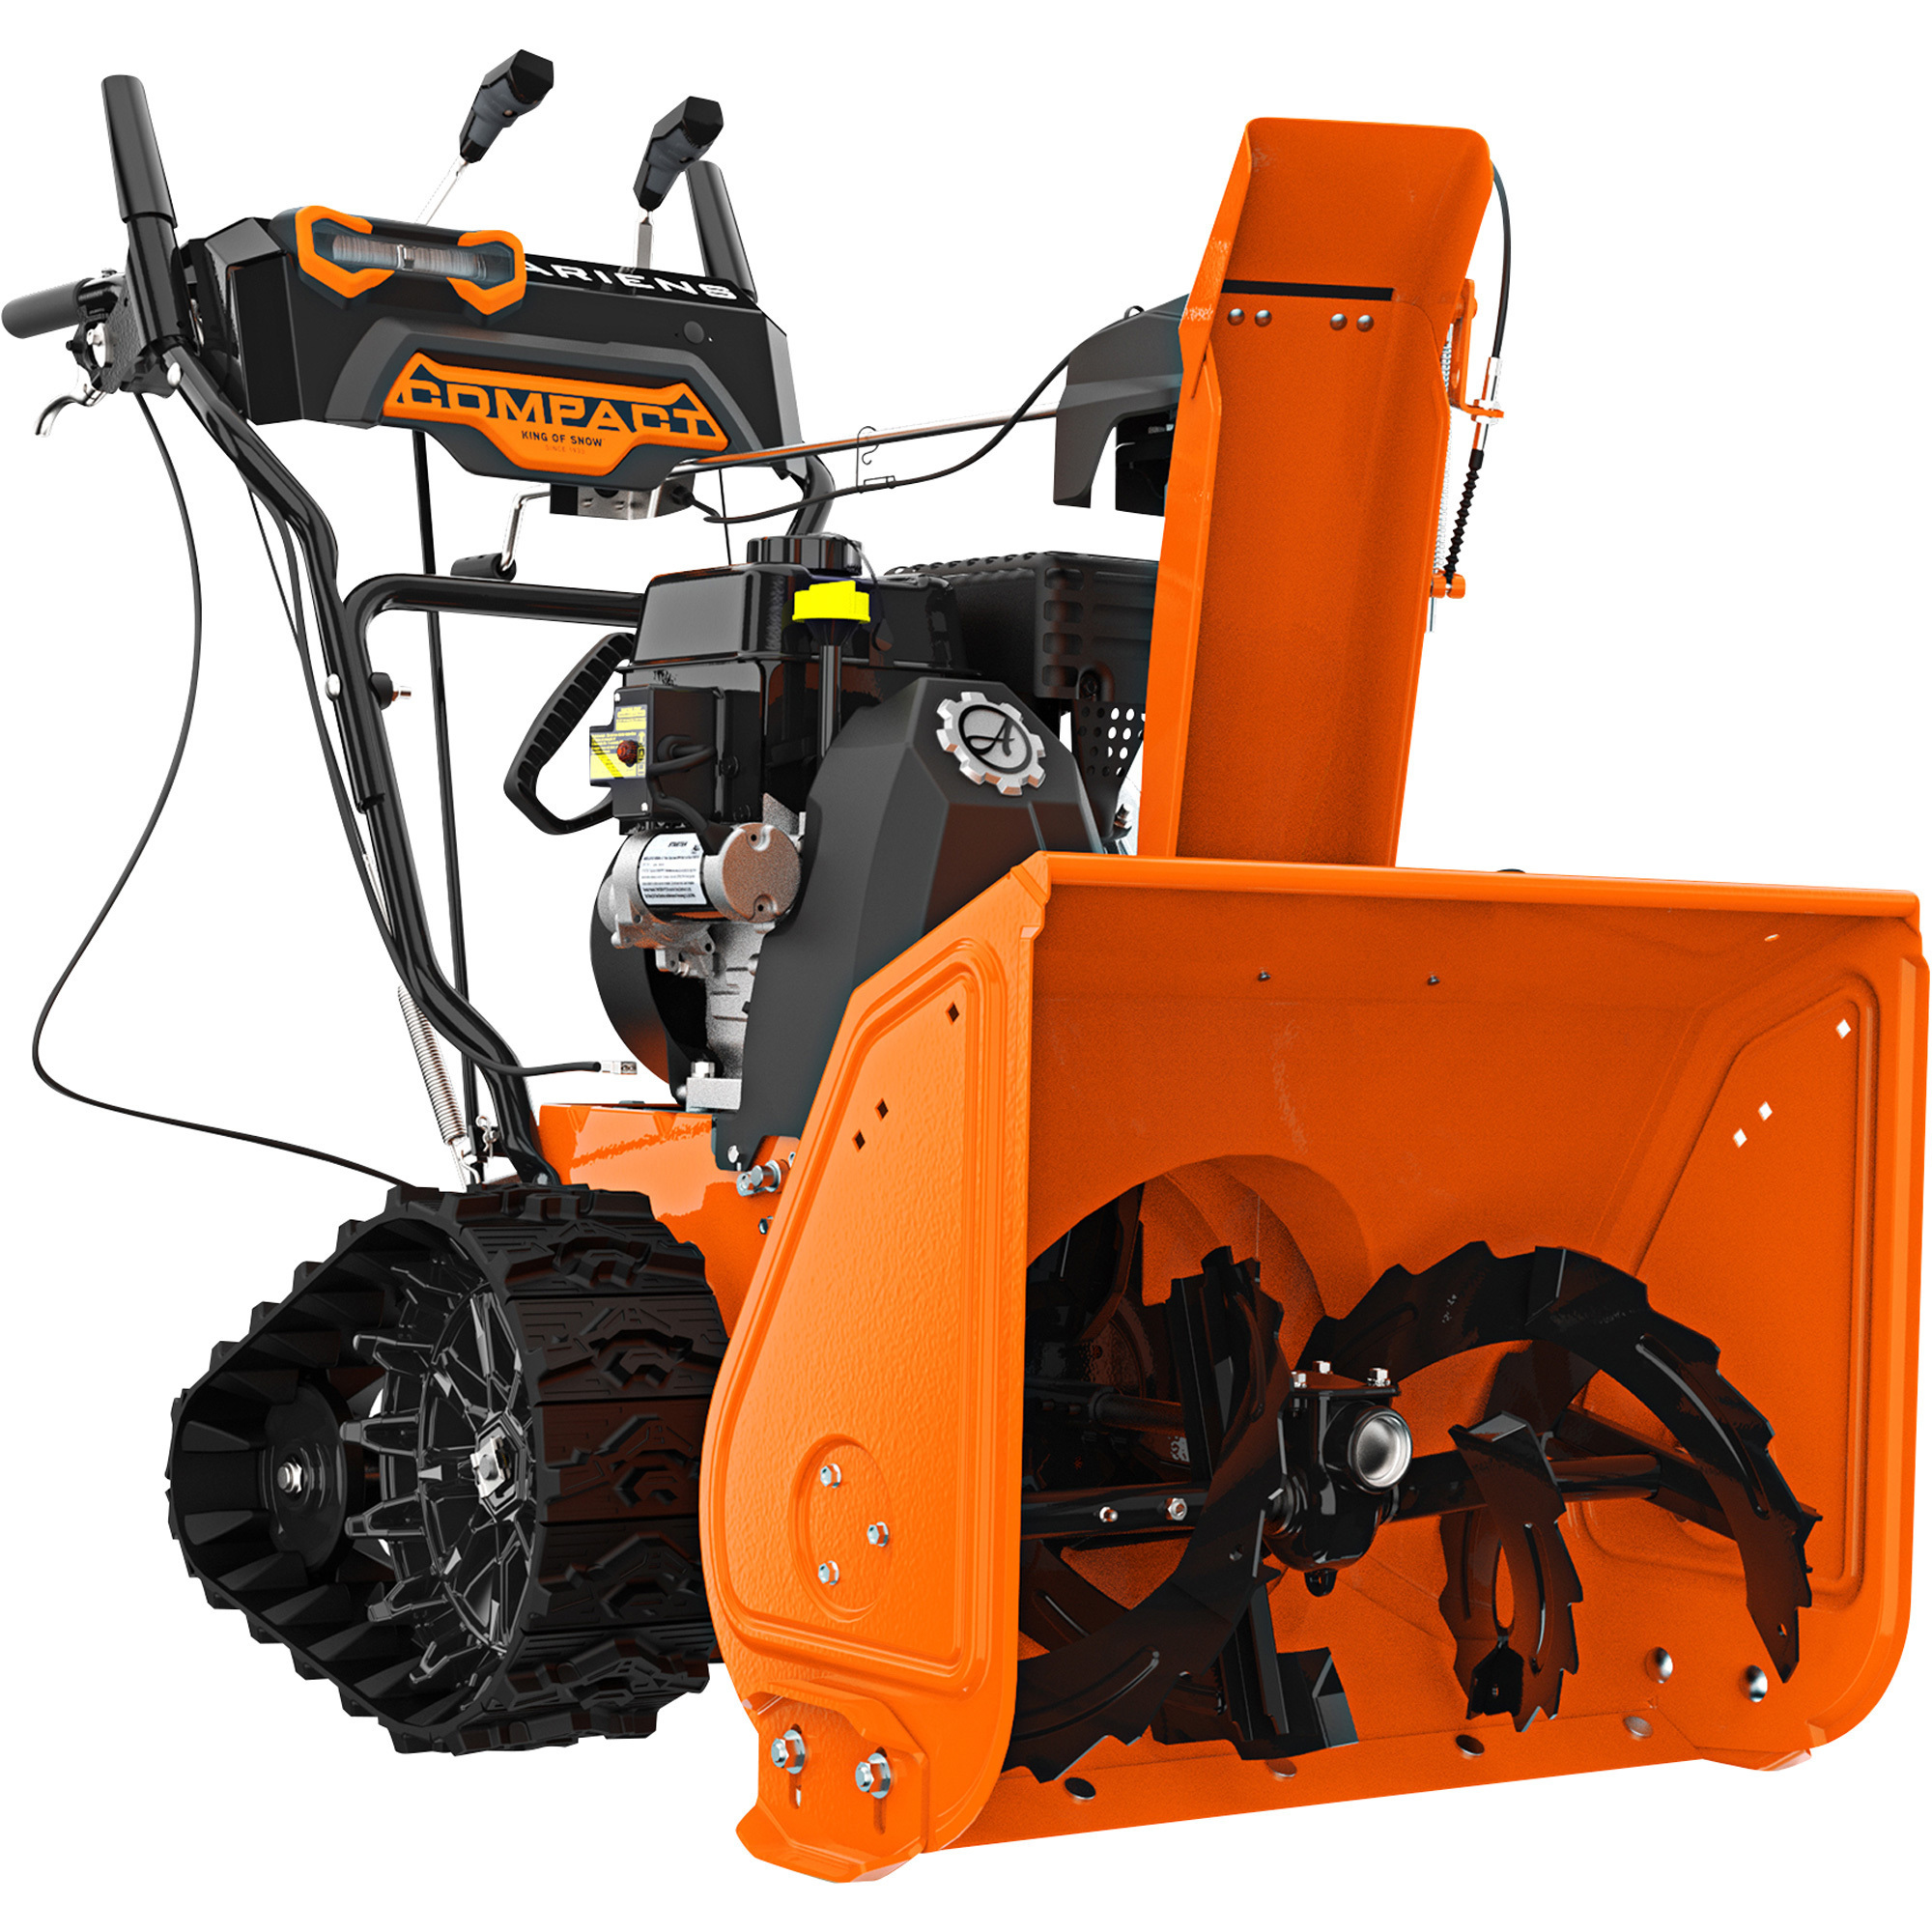 Ariens Compact RapidTrak 2-Stage Self-Propelled Snow Blower with Electric Start, 24Inch, 223cc, Model 920032